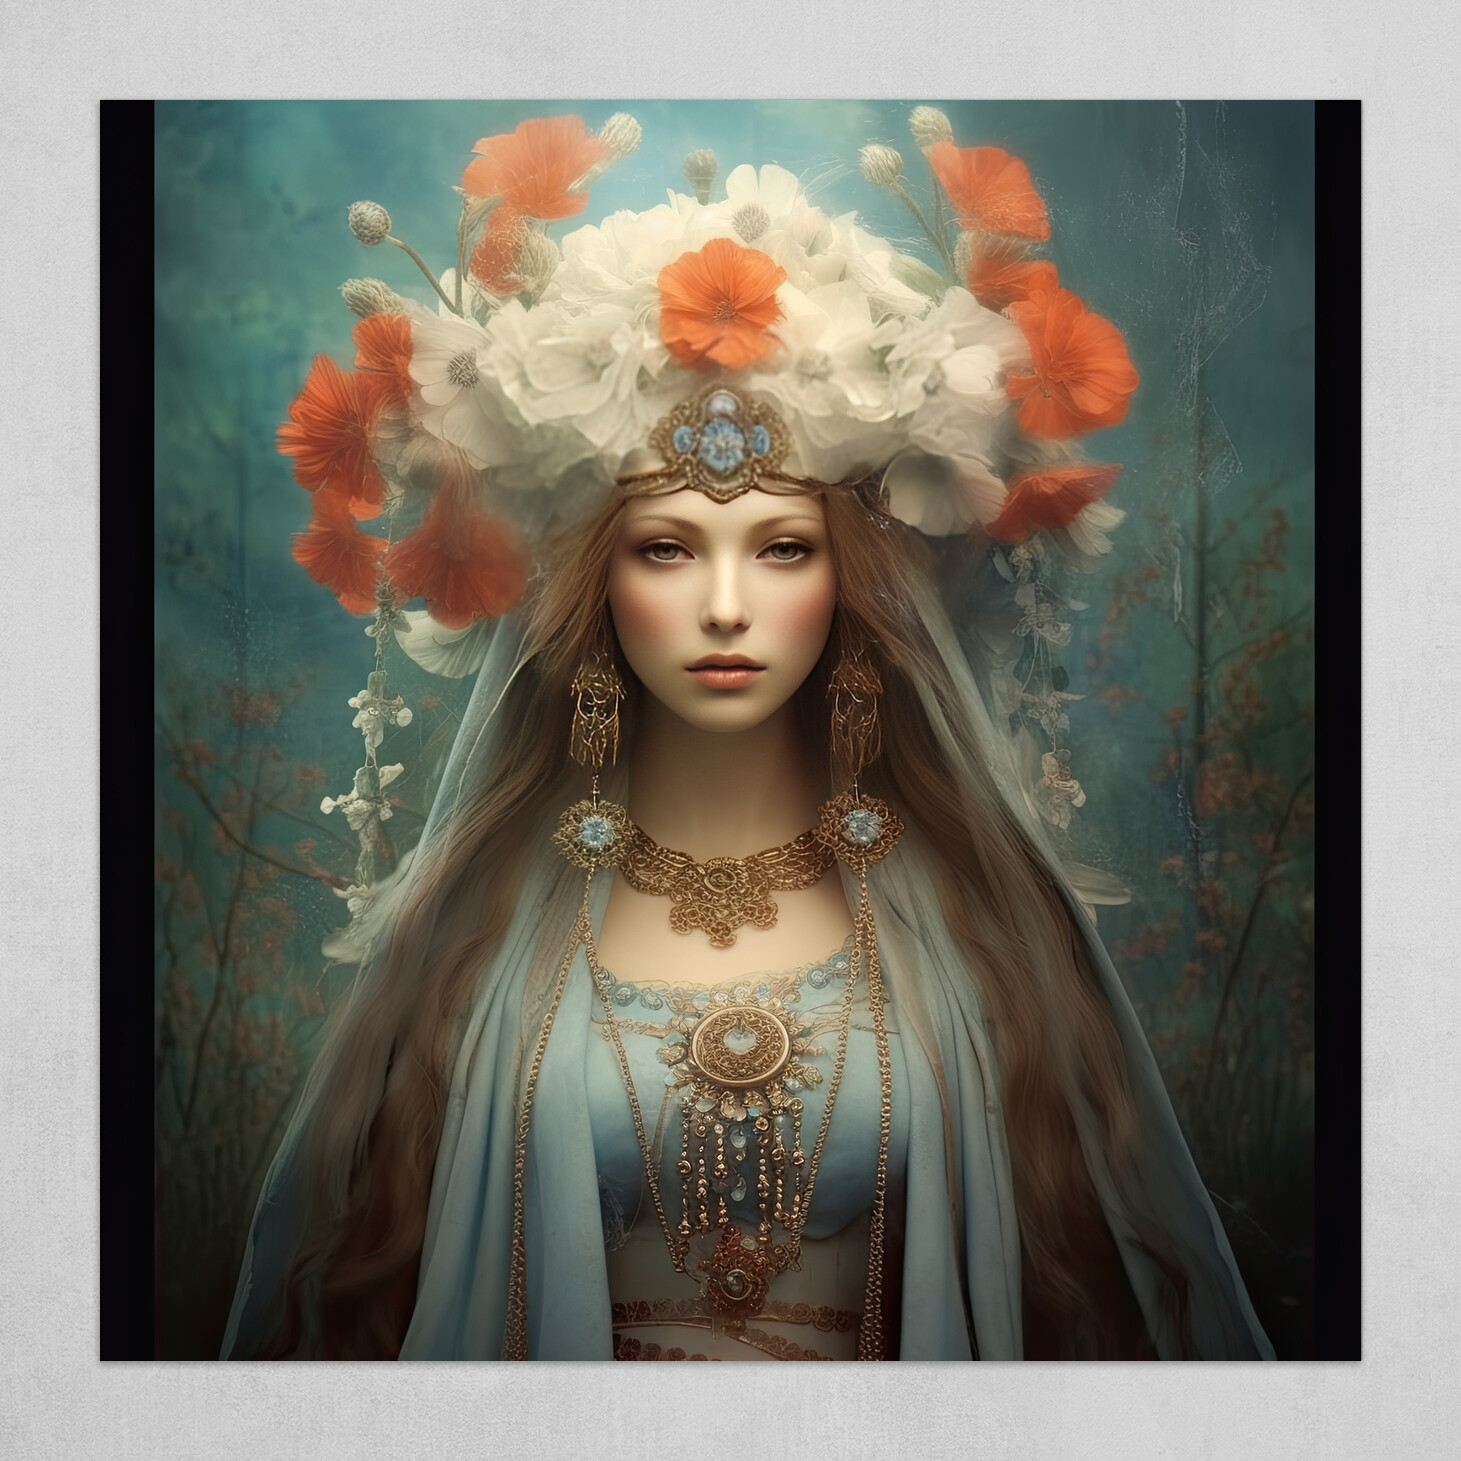 Ethereal Enchantment: A Portrait of Blossoms and Dreams